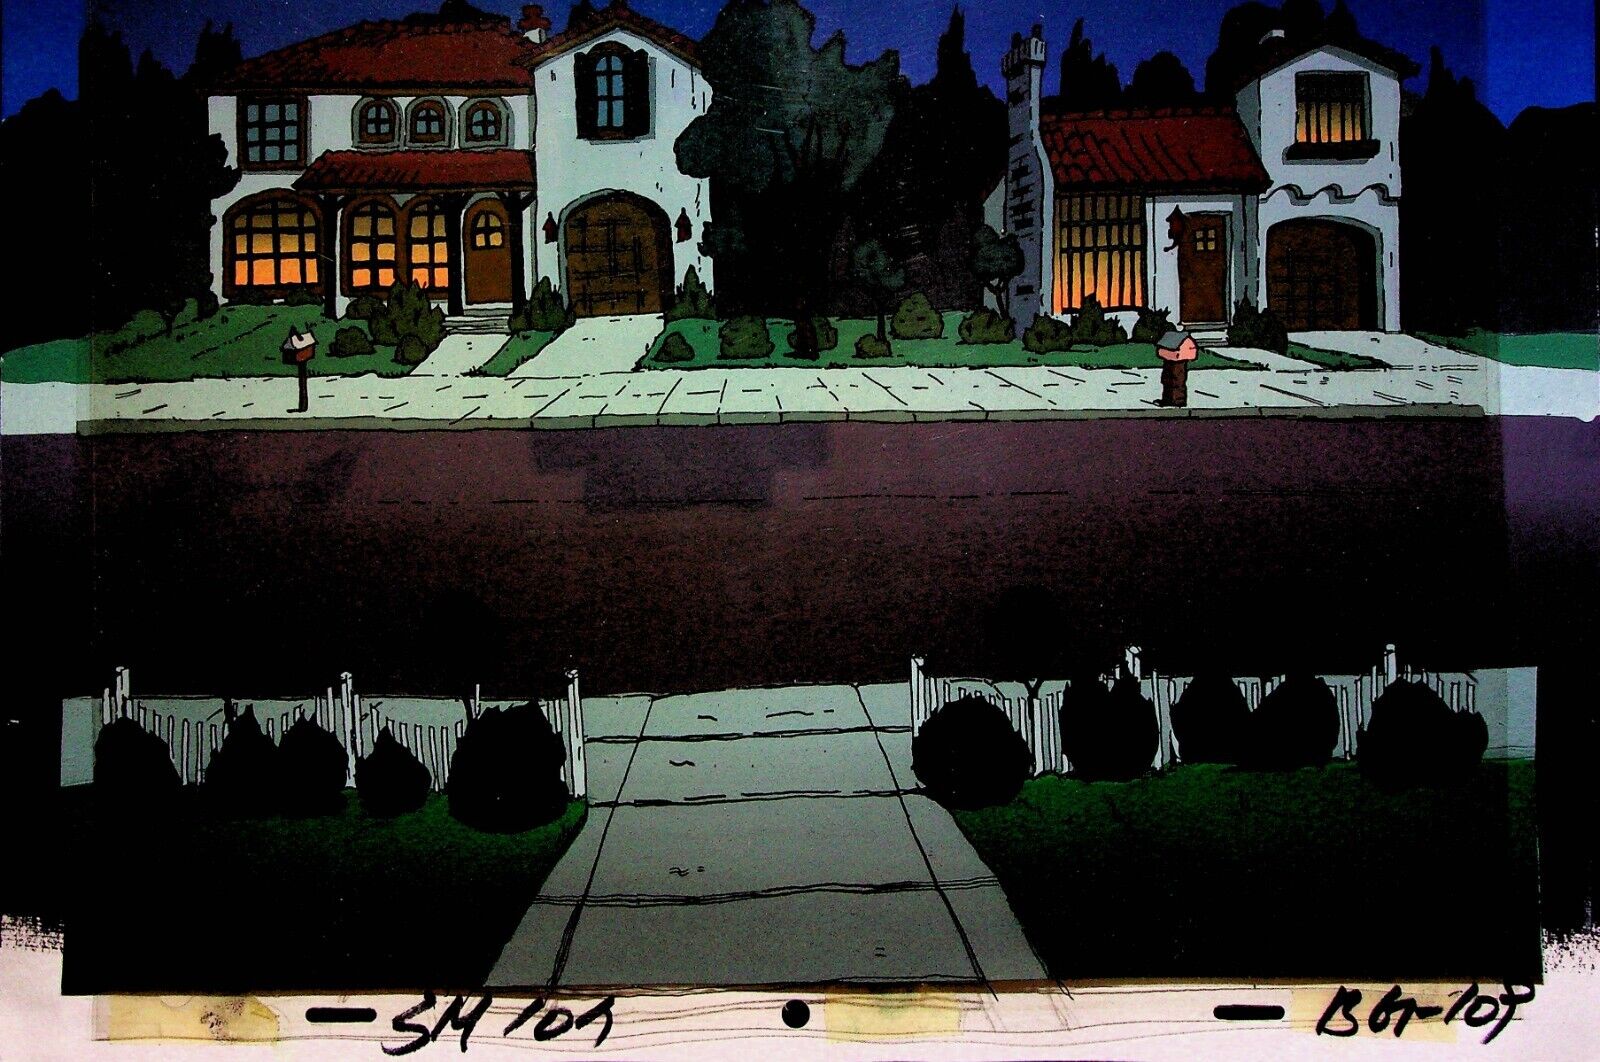 Sammy (TV Series) 2000 Animation Production Hand Painted Background DAVID SPADE